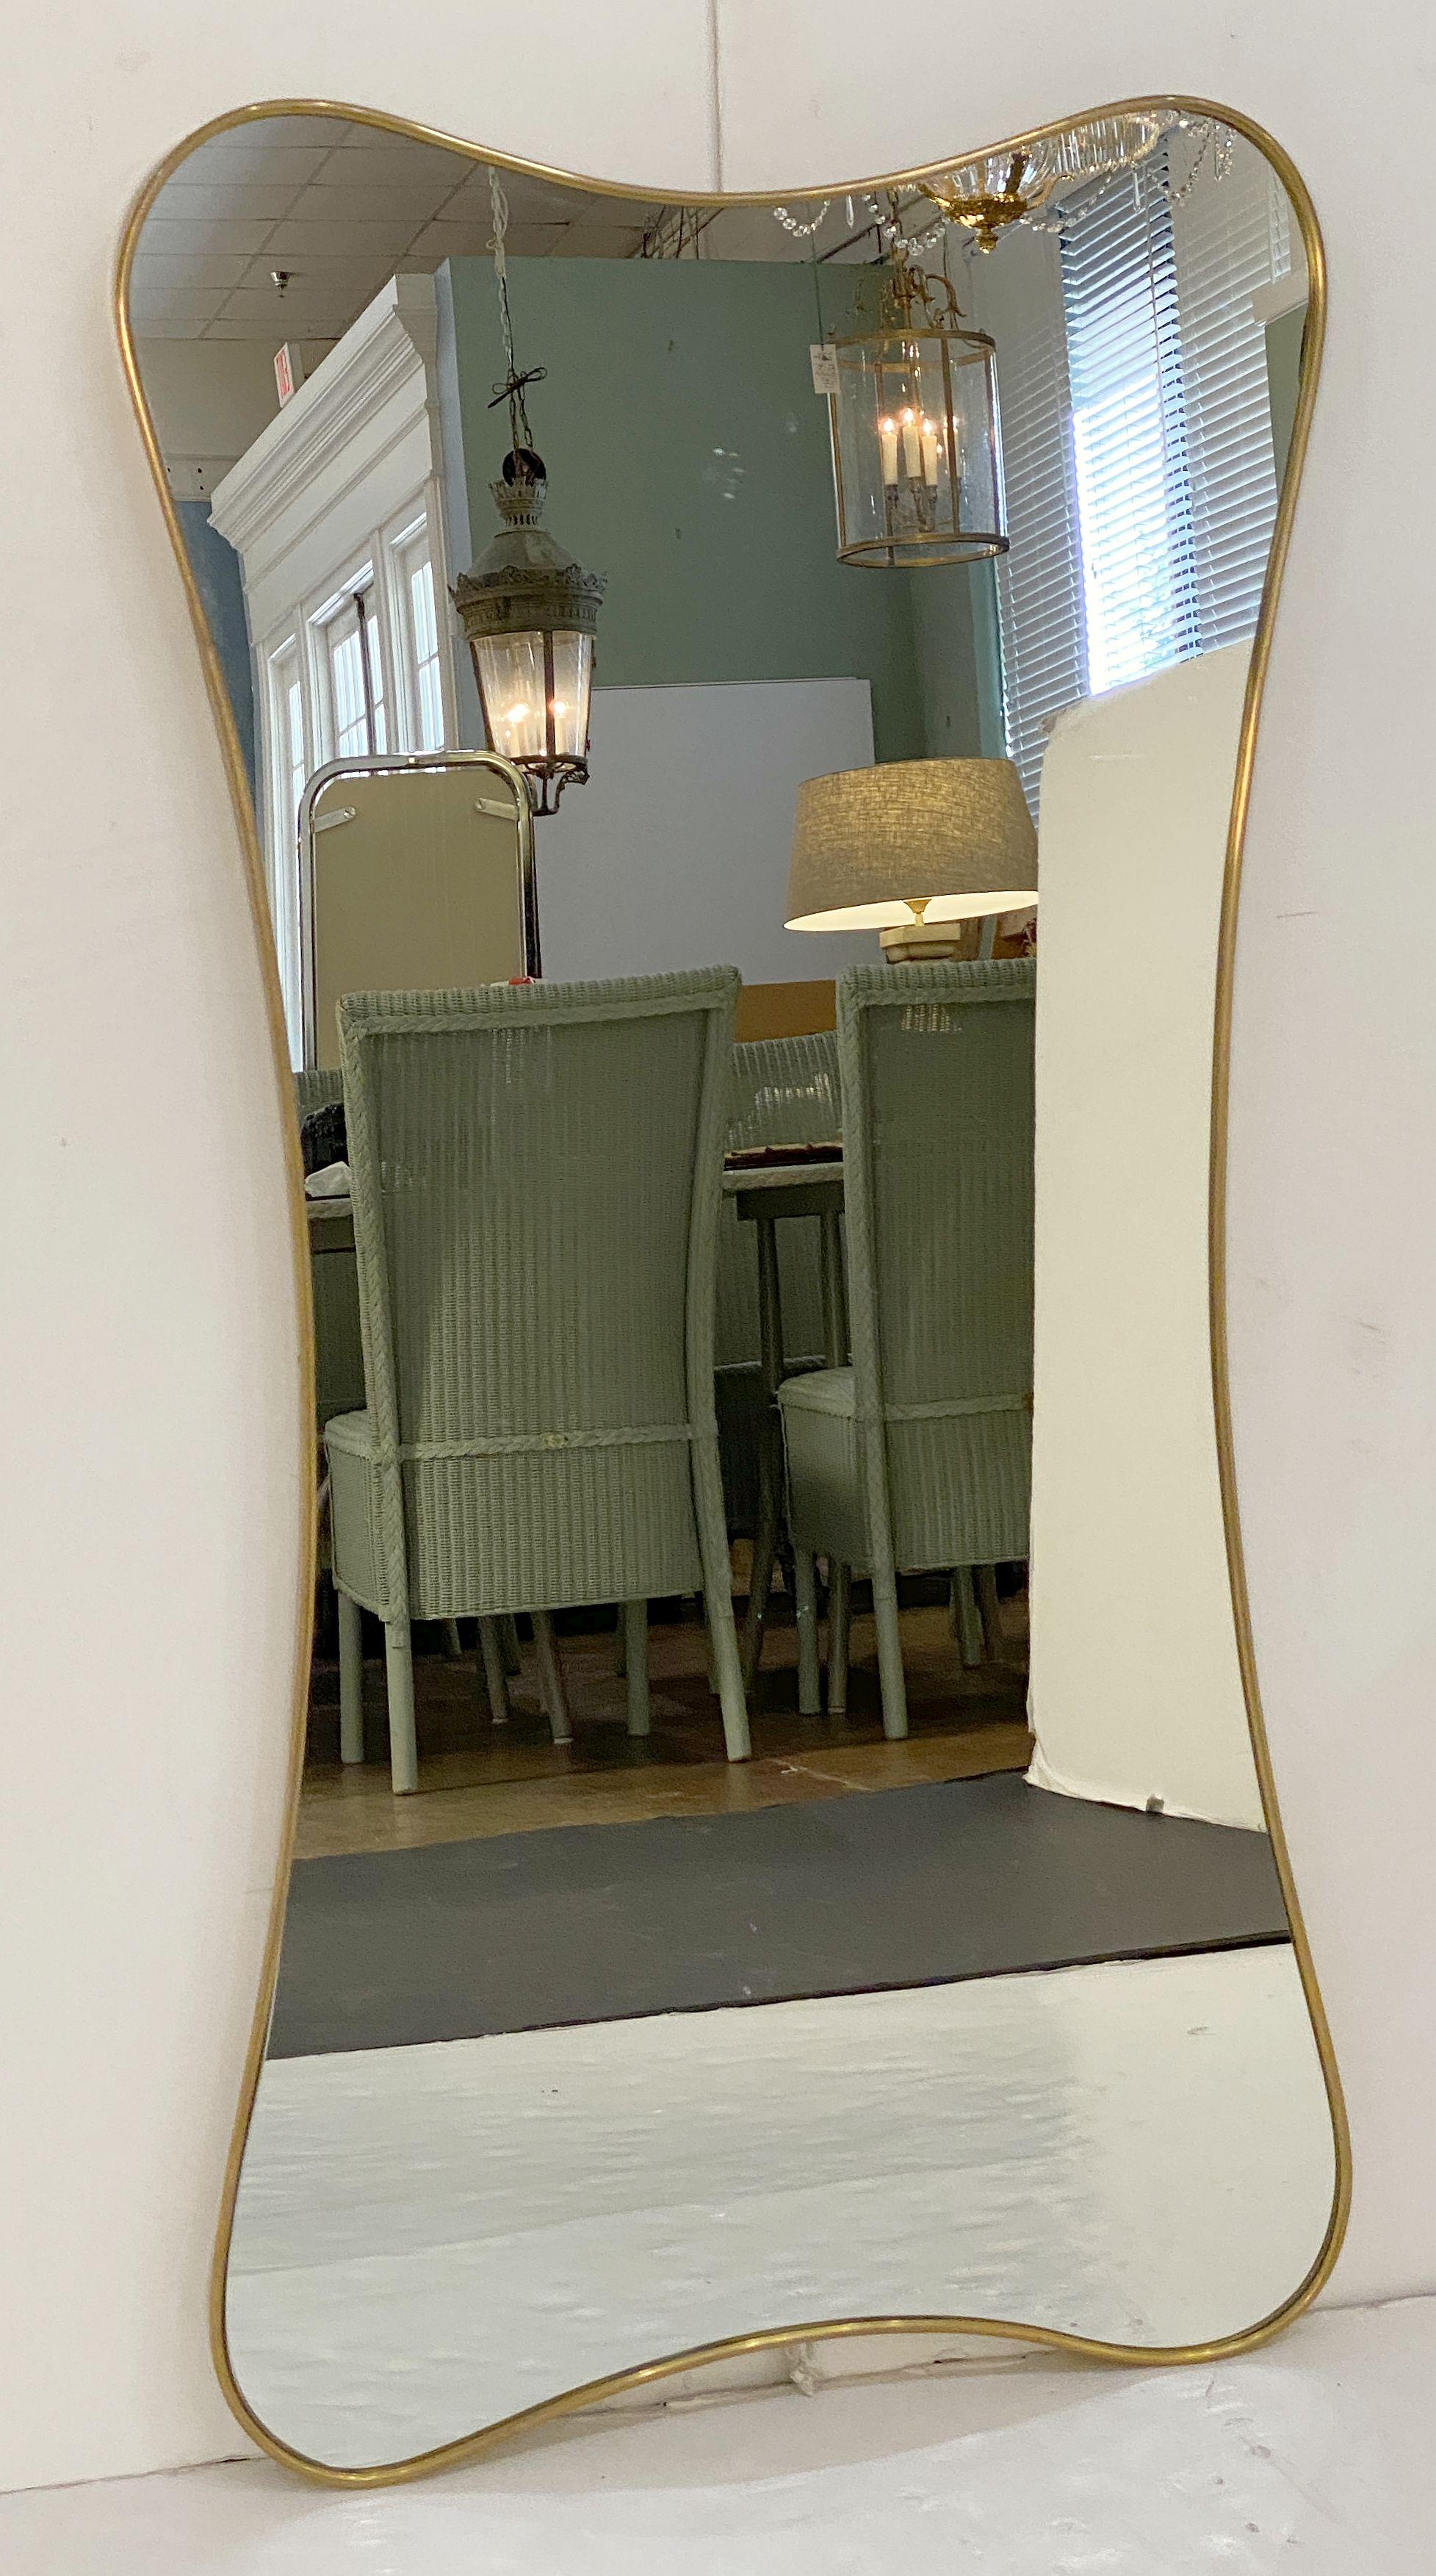 A fine Italian Modern wall mirror featuring a clean, Mid-Century design with an elegant, curved frame in brass, in the style of the famed designer, Gio Ponti. (Italian, 1891-1979)

An architect, furniture and industrial designer and editor, Gio